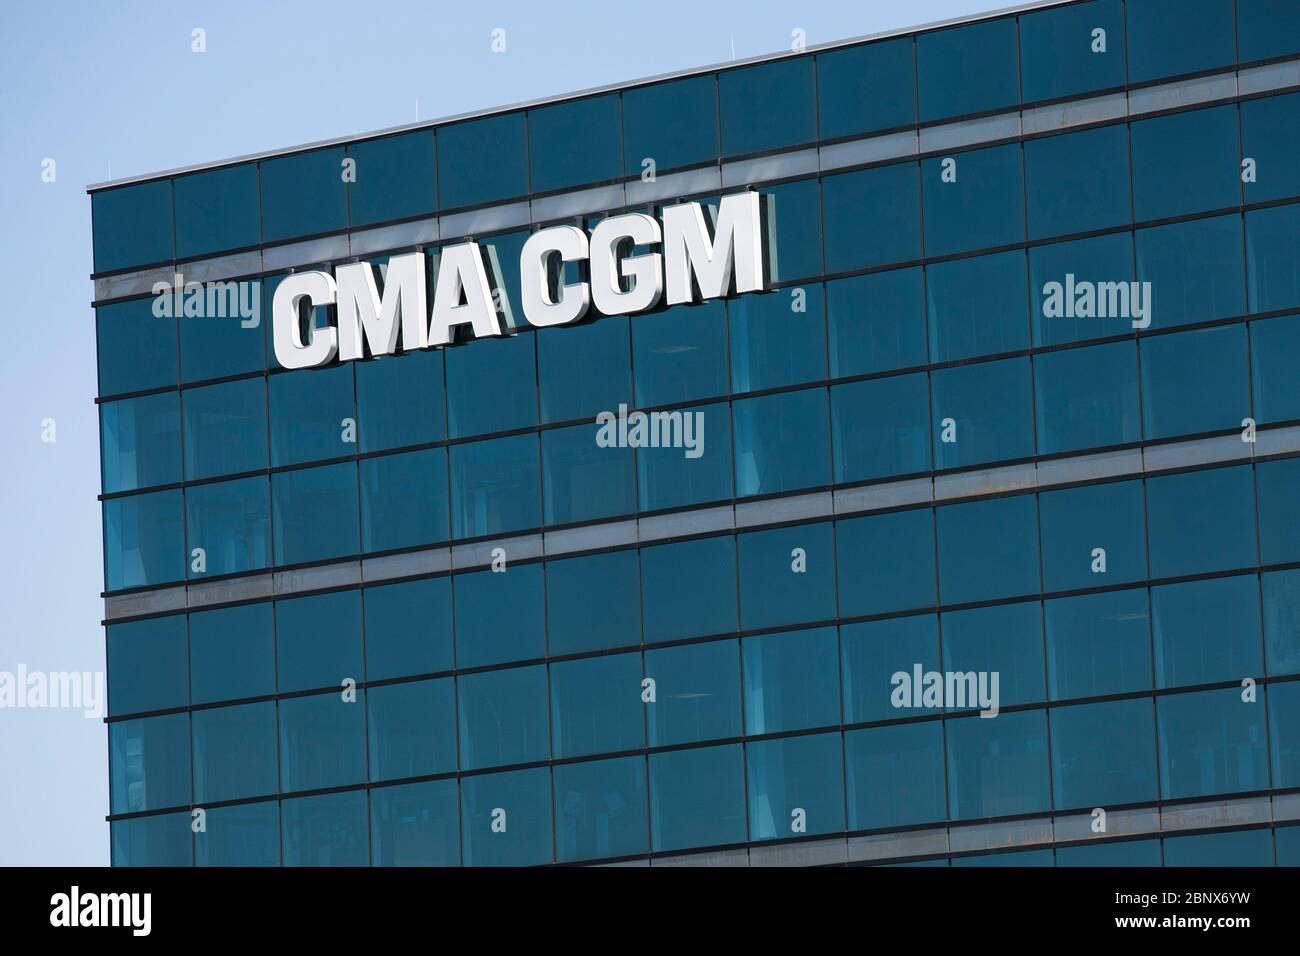 A logo sign outside of a facility occupied by CMA CGM in Norfolk, Virginia on May 2, 2020. Stock Photo